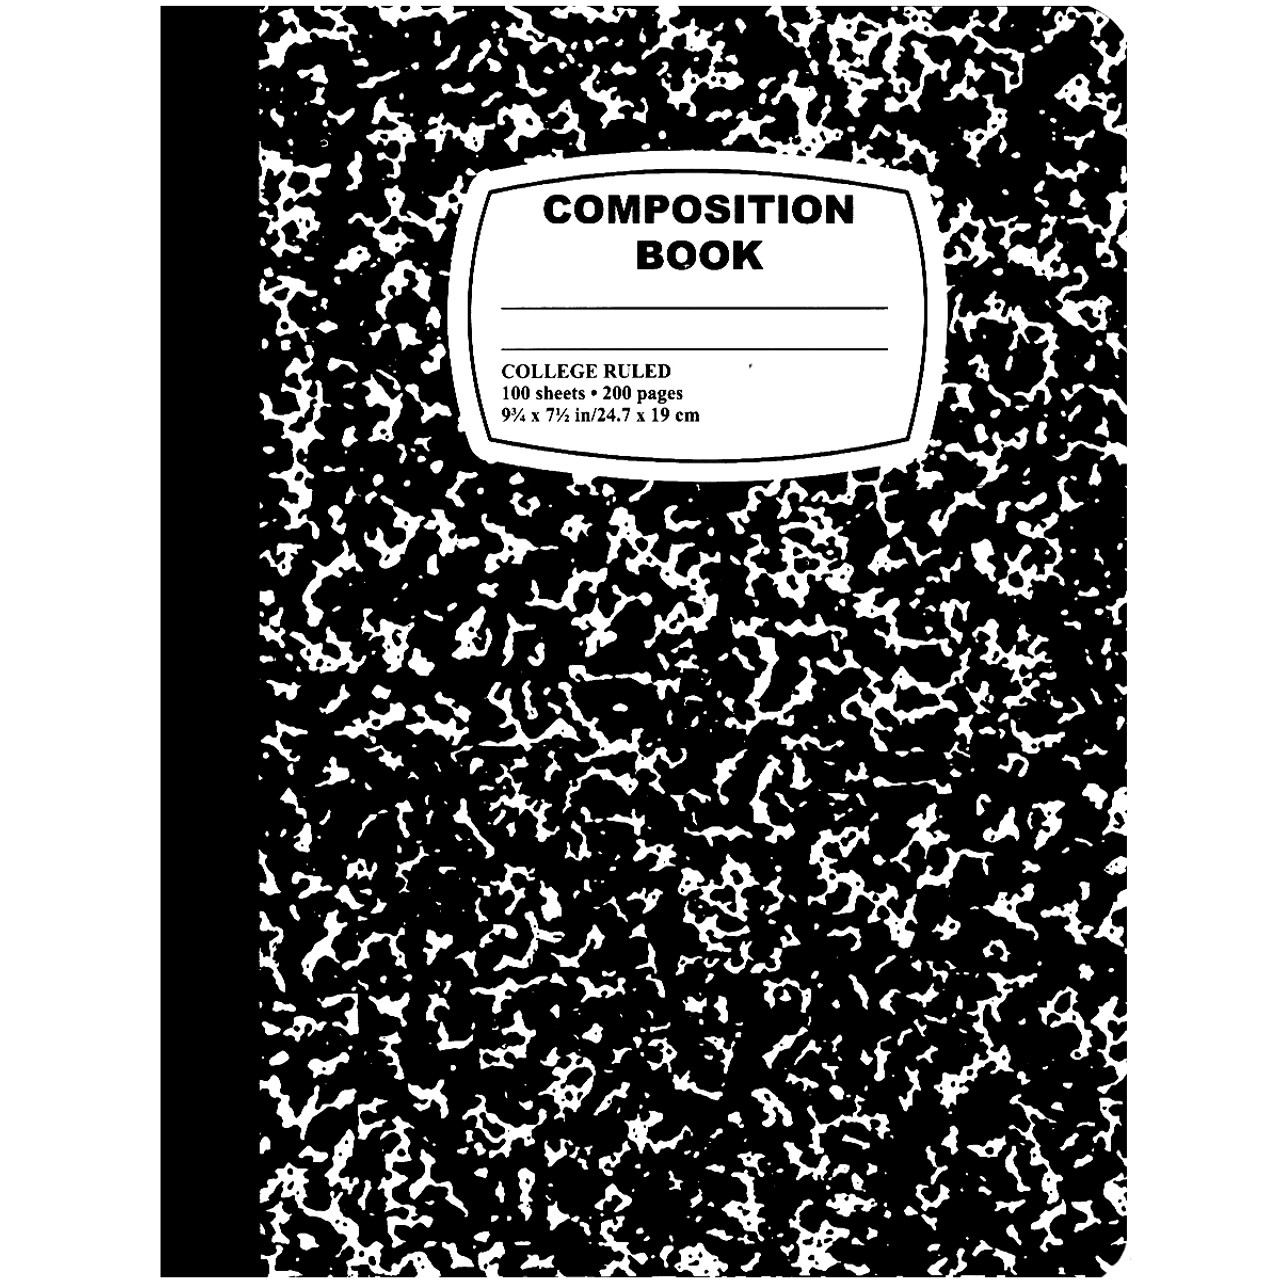 Wholesale School Supplies College Ruled 4 Colour Composition Notebook in  9.8X7.5' - China School Notebook, College Ruled Notebook